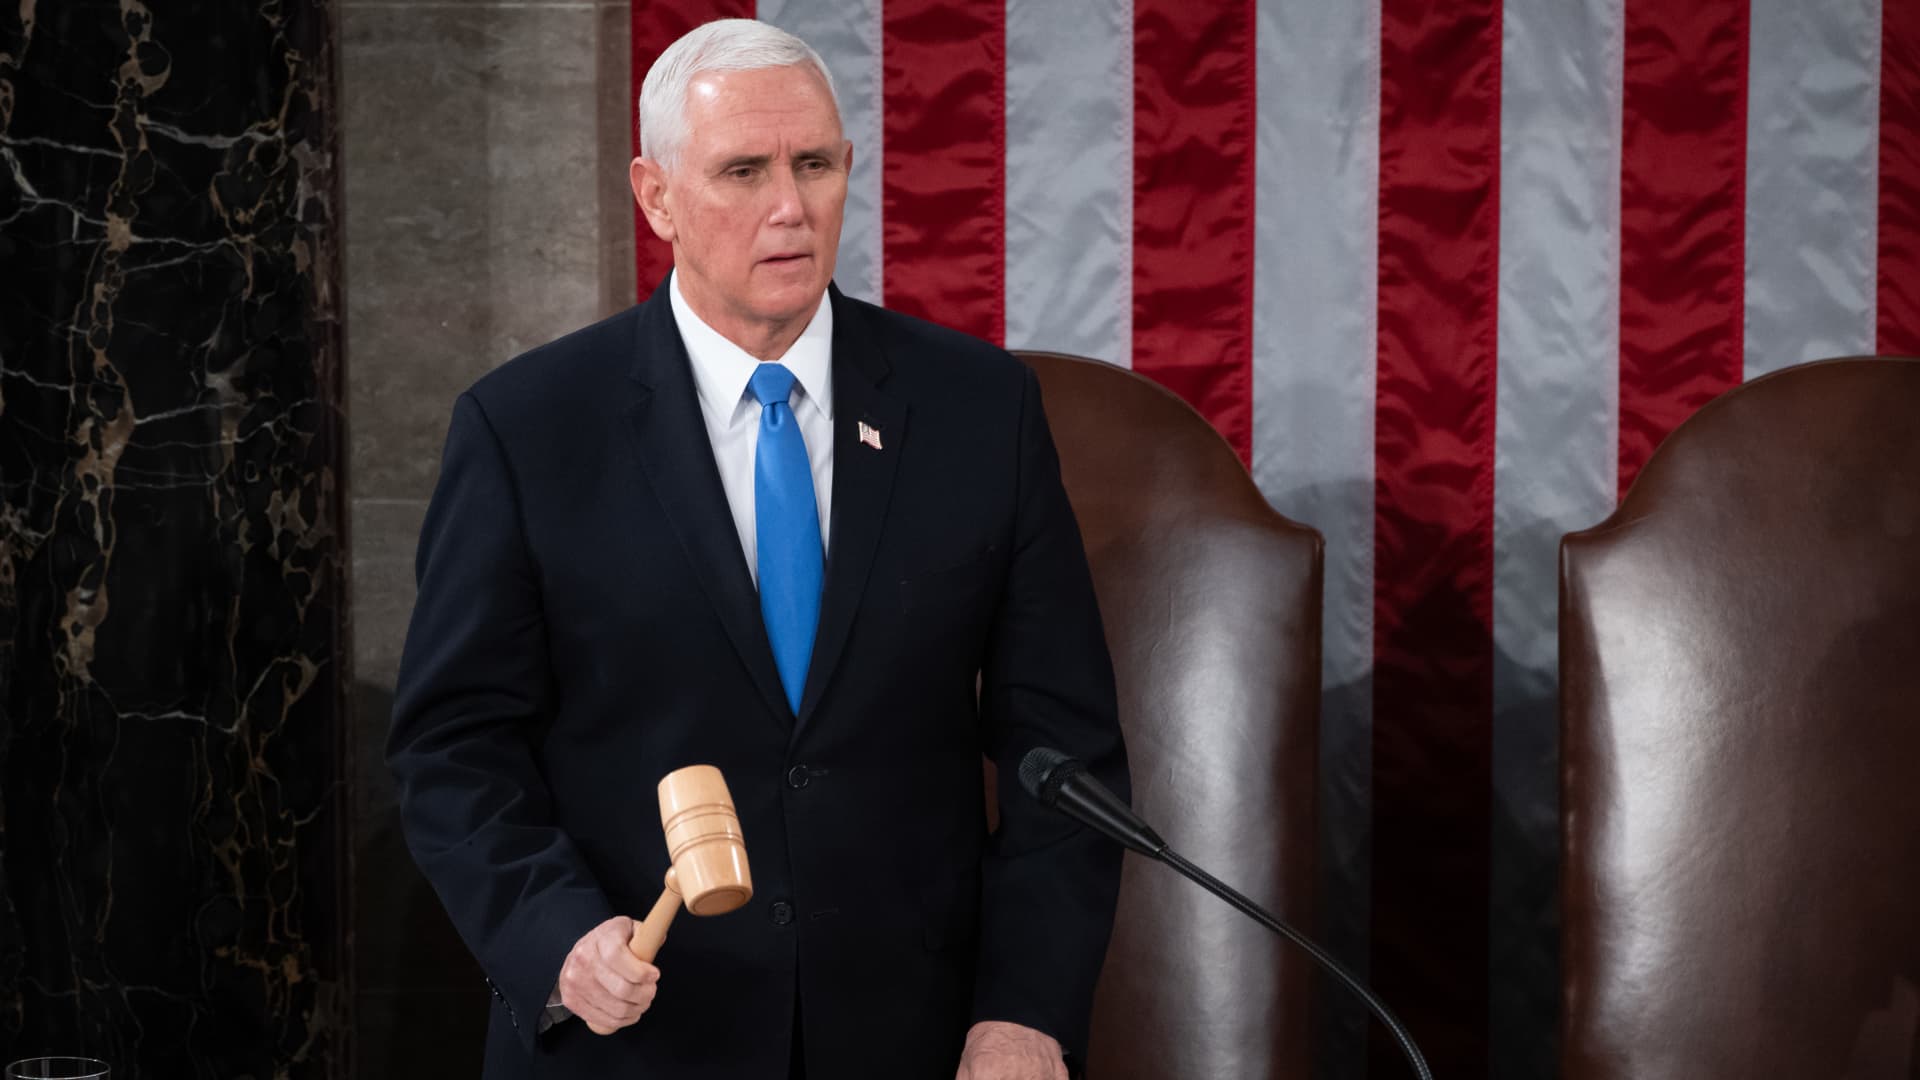 U.S. Vice President Mike Pence presides over a joint session of Congress on January 06, 2021 in Washington, DC.